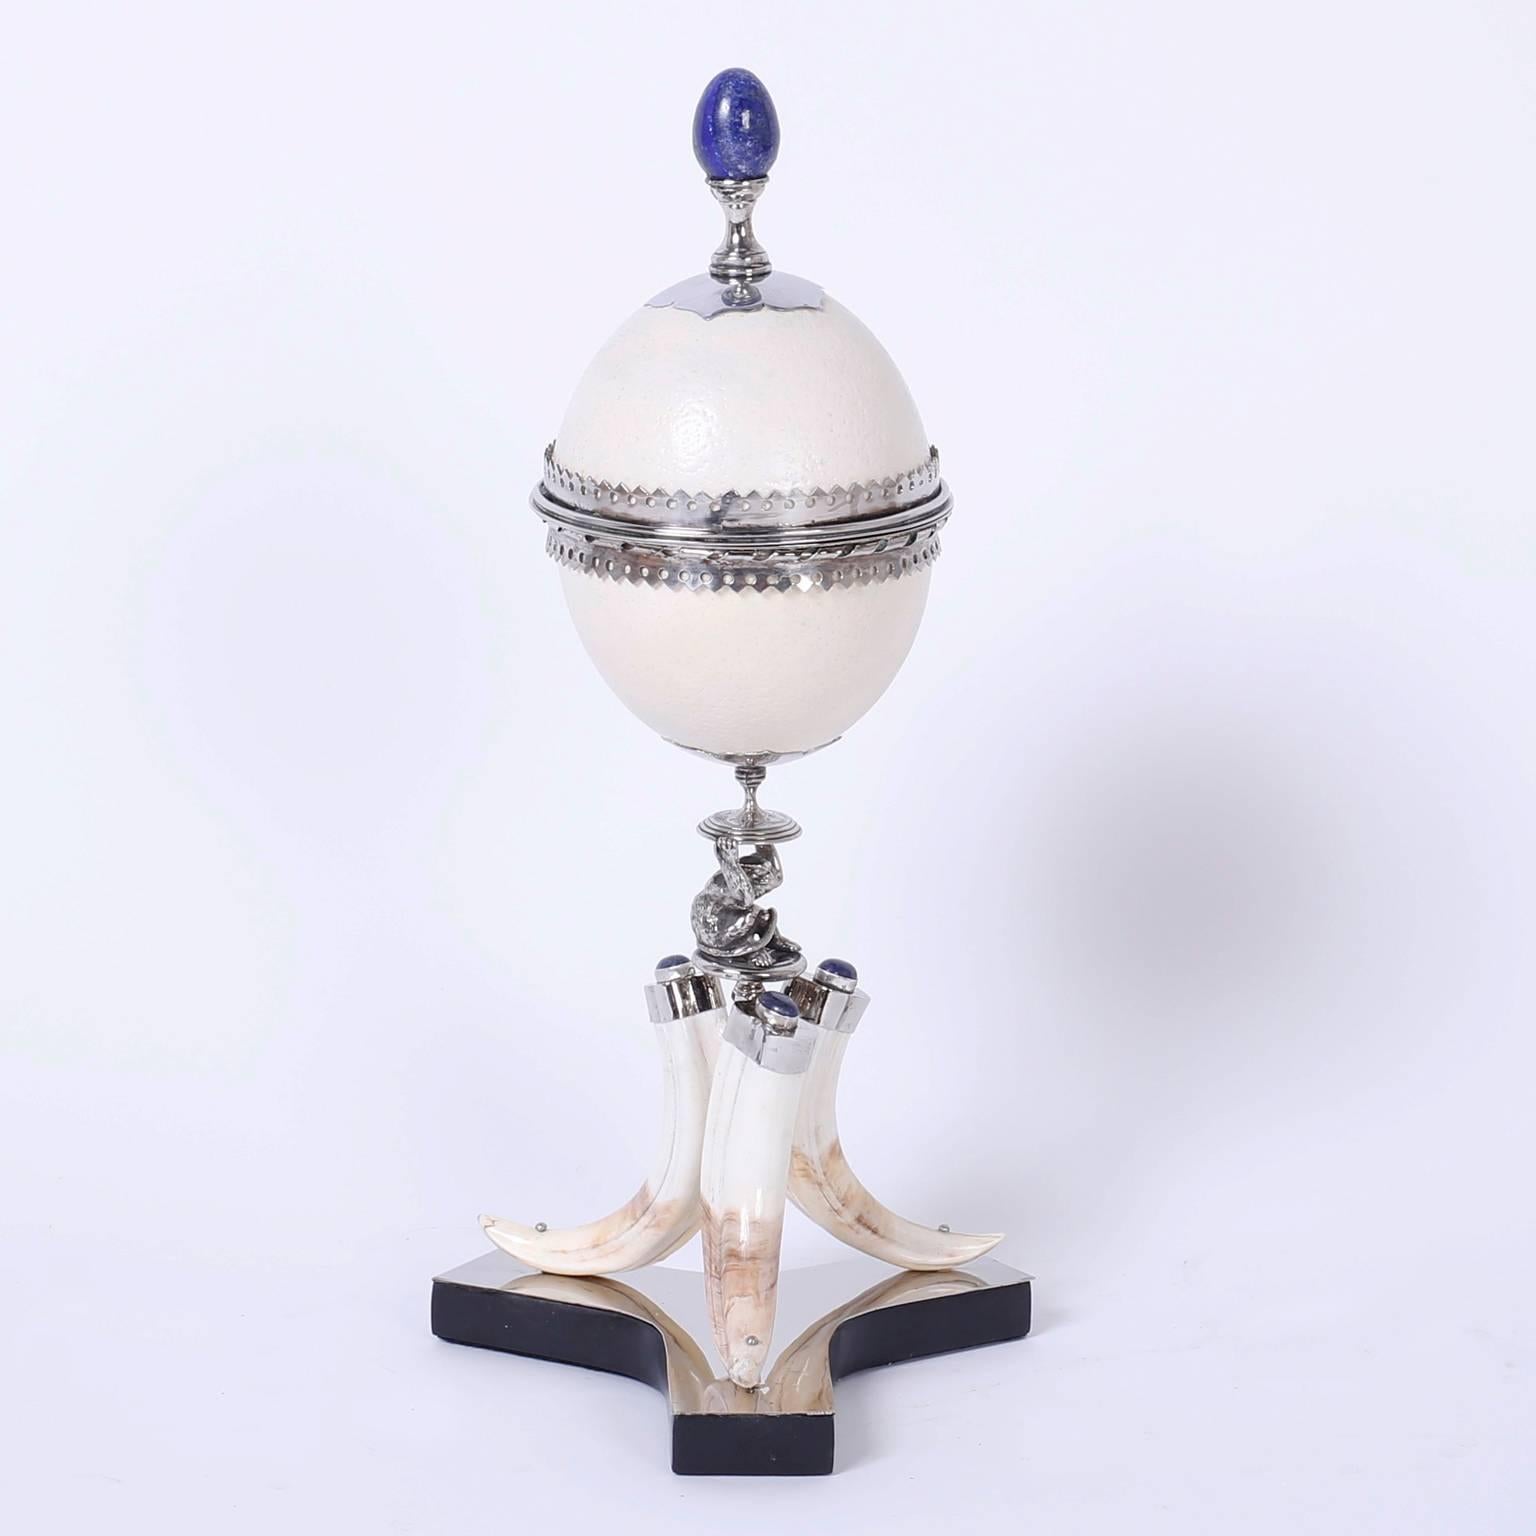 Fine and rare pair of Redmile garnitures featuring lapis lazuli finials on ostrich egg boxes carefully supported by seated silver plated monkeys on three boar tusk bases. For the discriminating collector of luxurious decorative arts. Signed Redmile